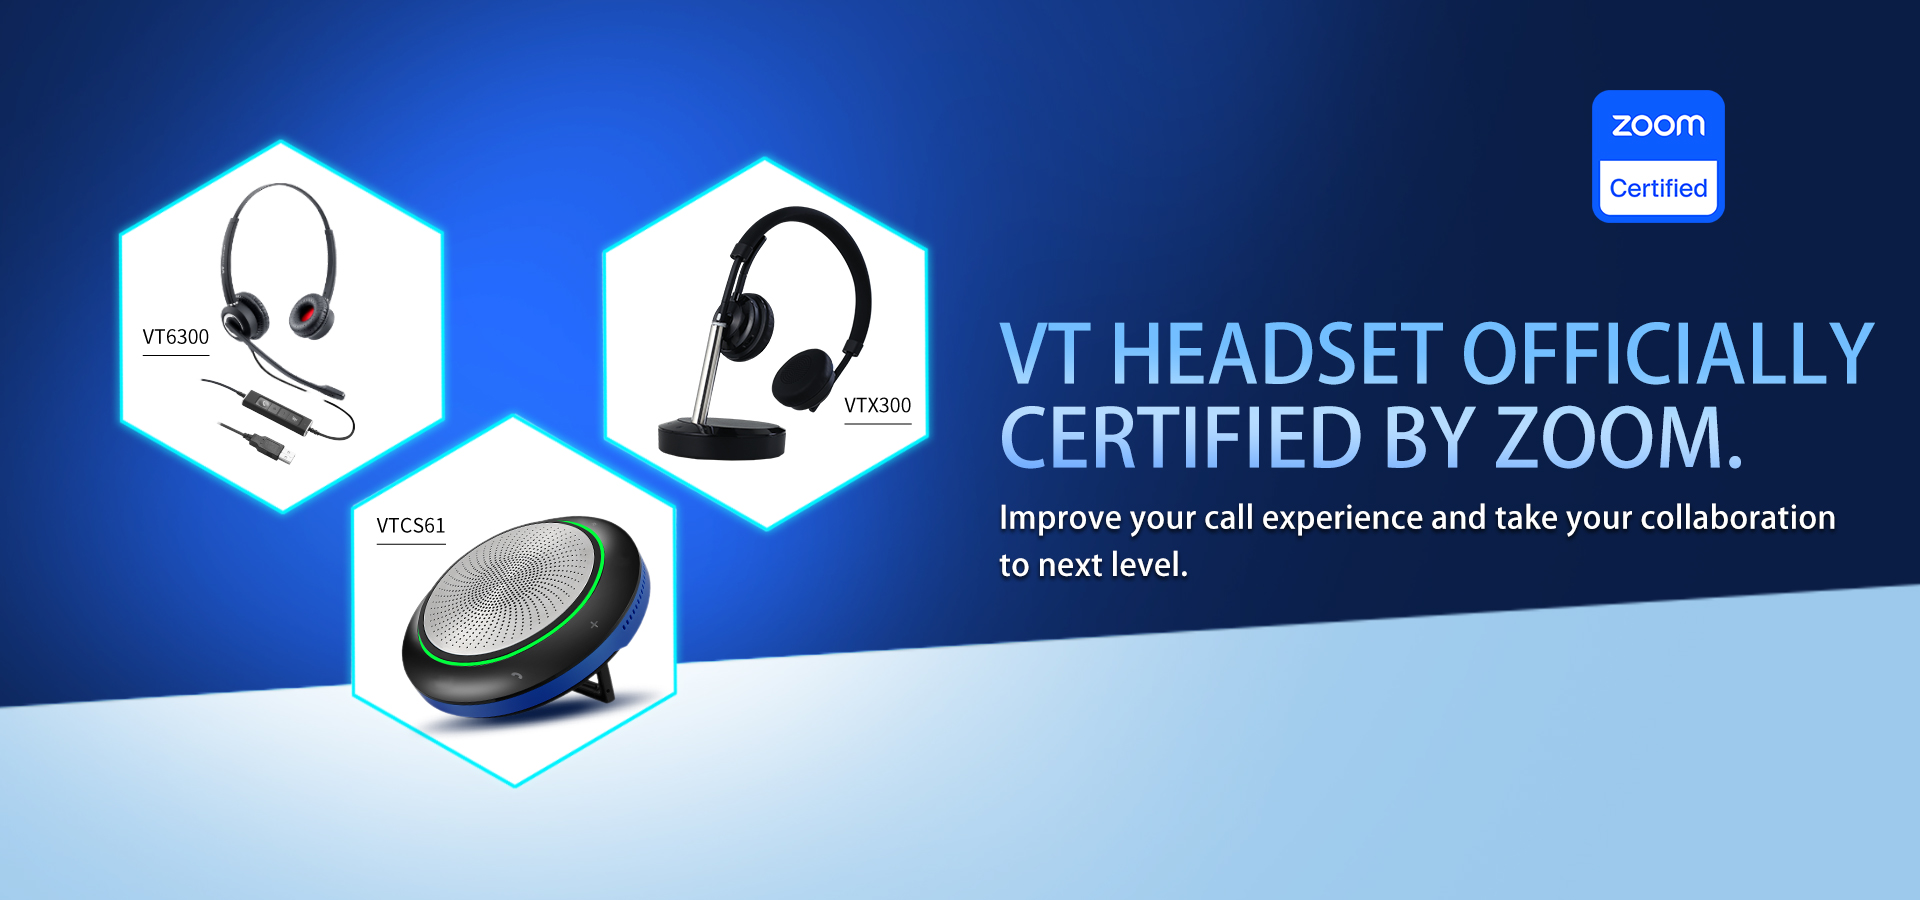 VT Products with Zoom Certified